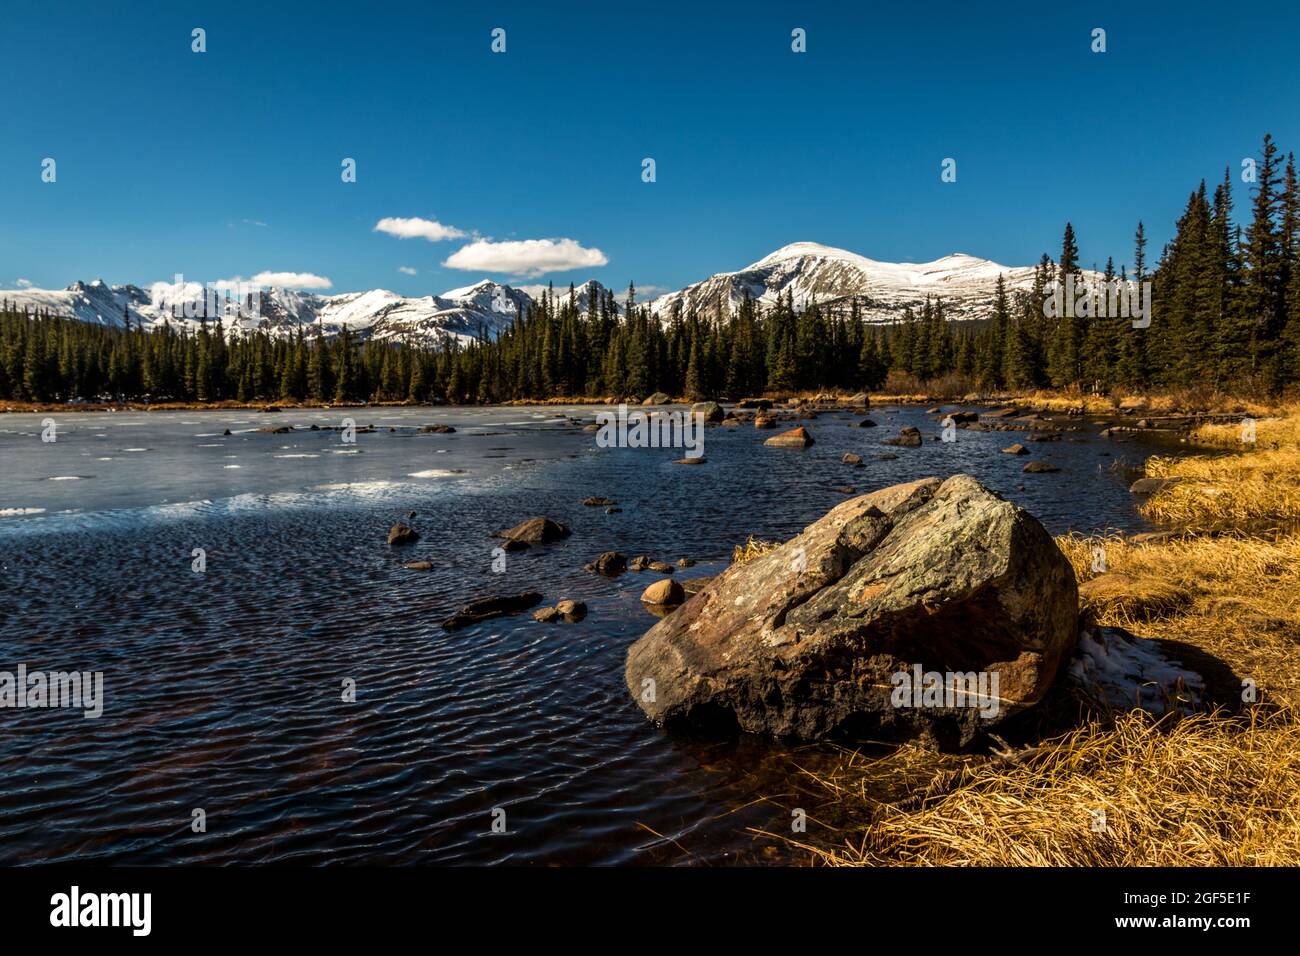 A wide angle landscape shot of a snowy Colorado mountain range and pine trees with a lake of water in the foreground with rocks, daytime in winter Stock Photo